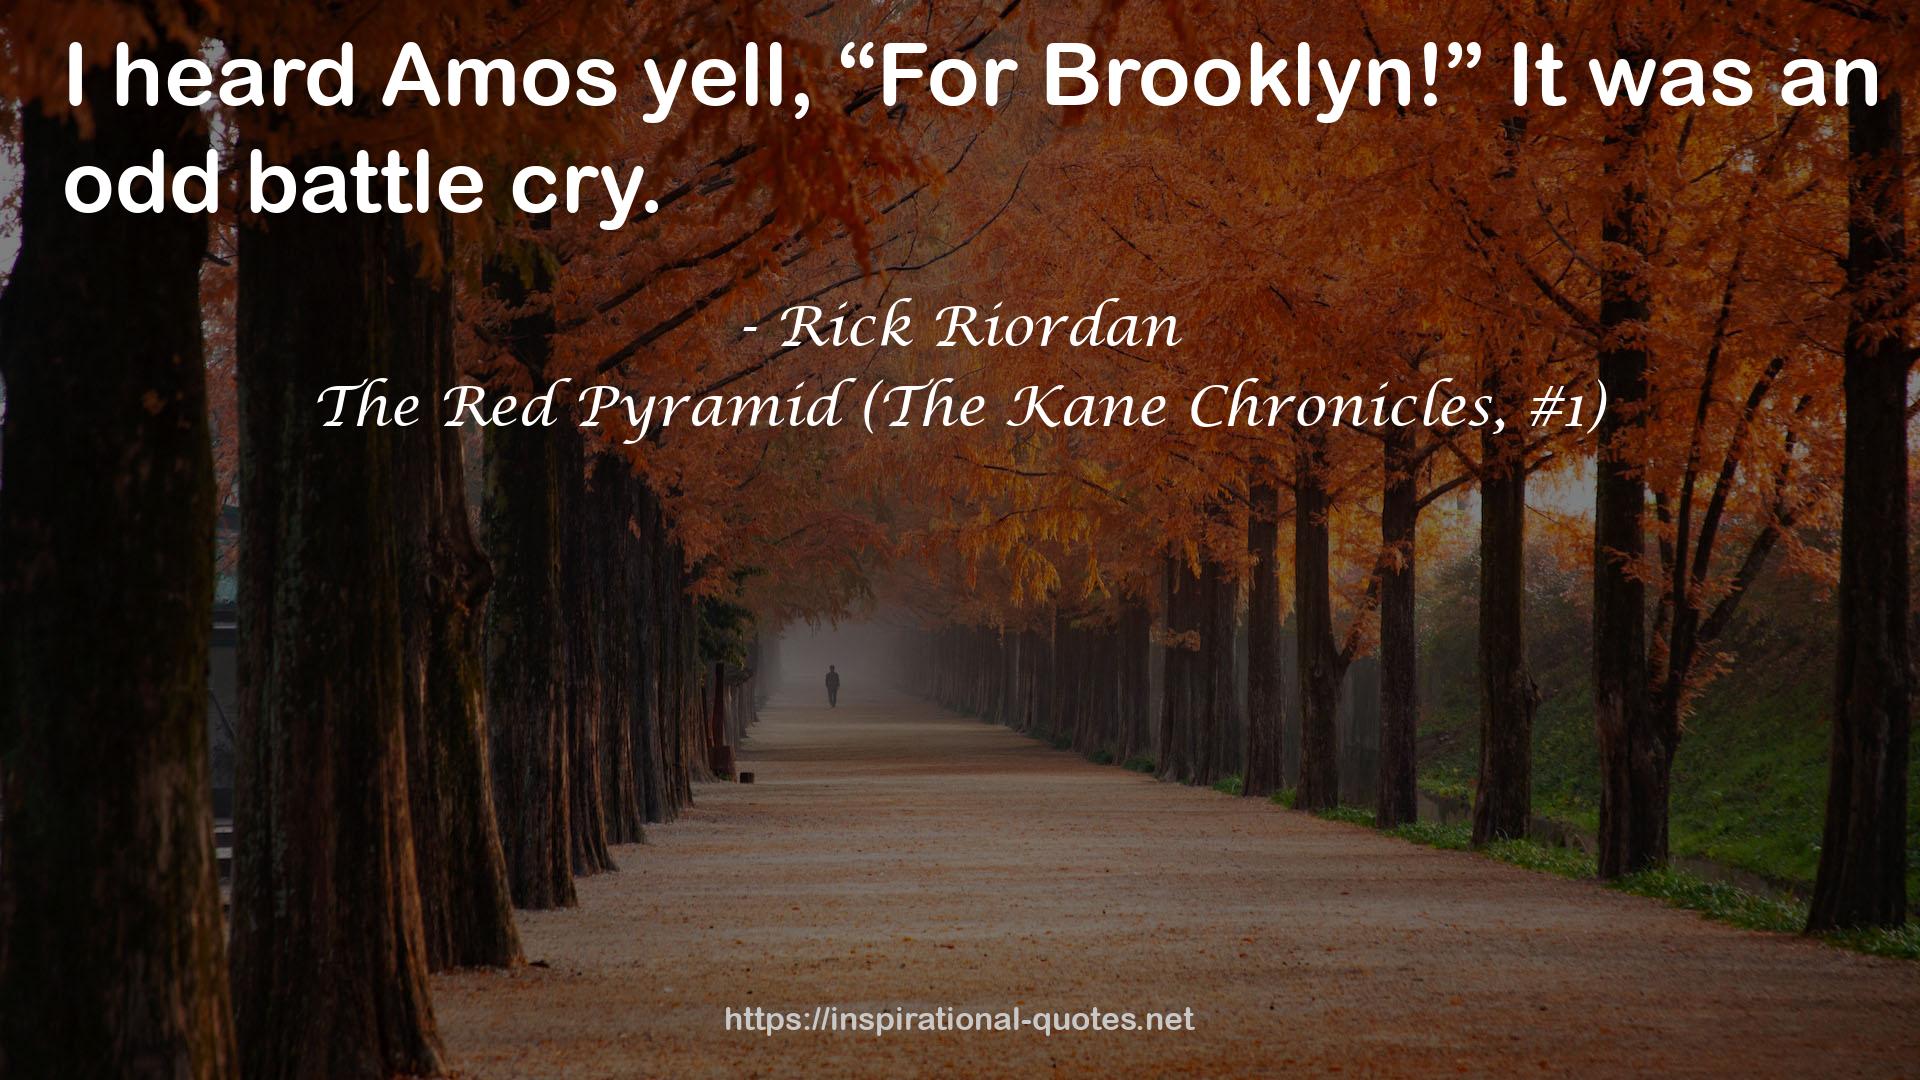 The Red Pyramid (The Kane Chronicles, #1) QUOTES